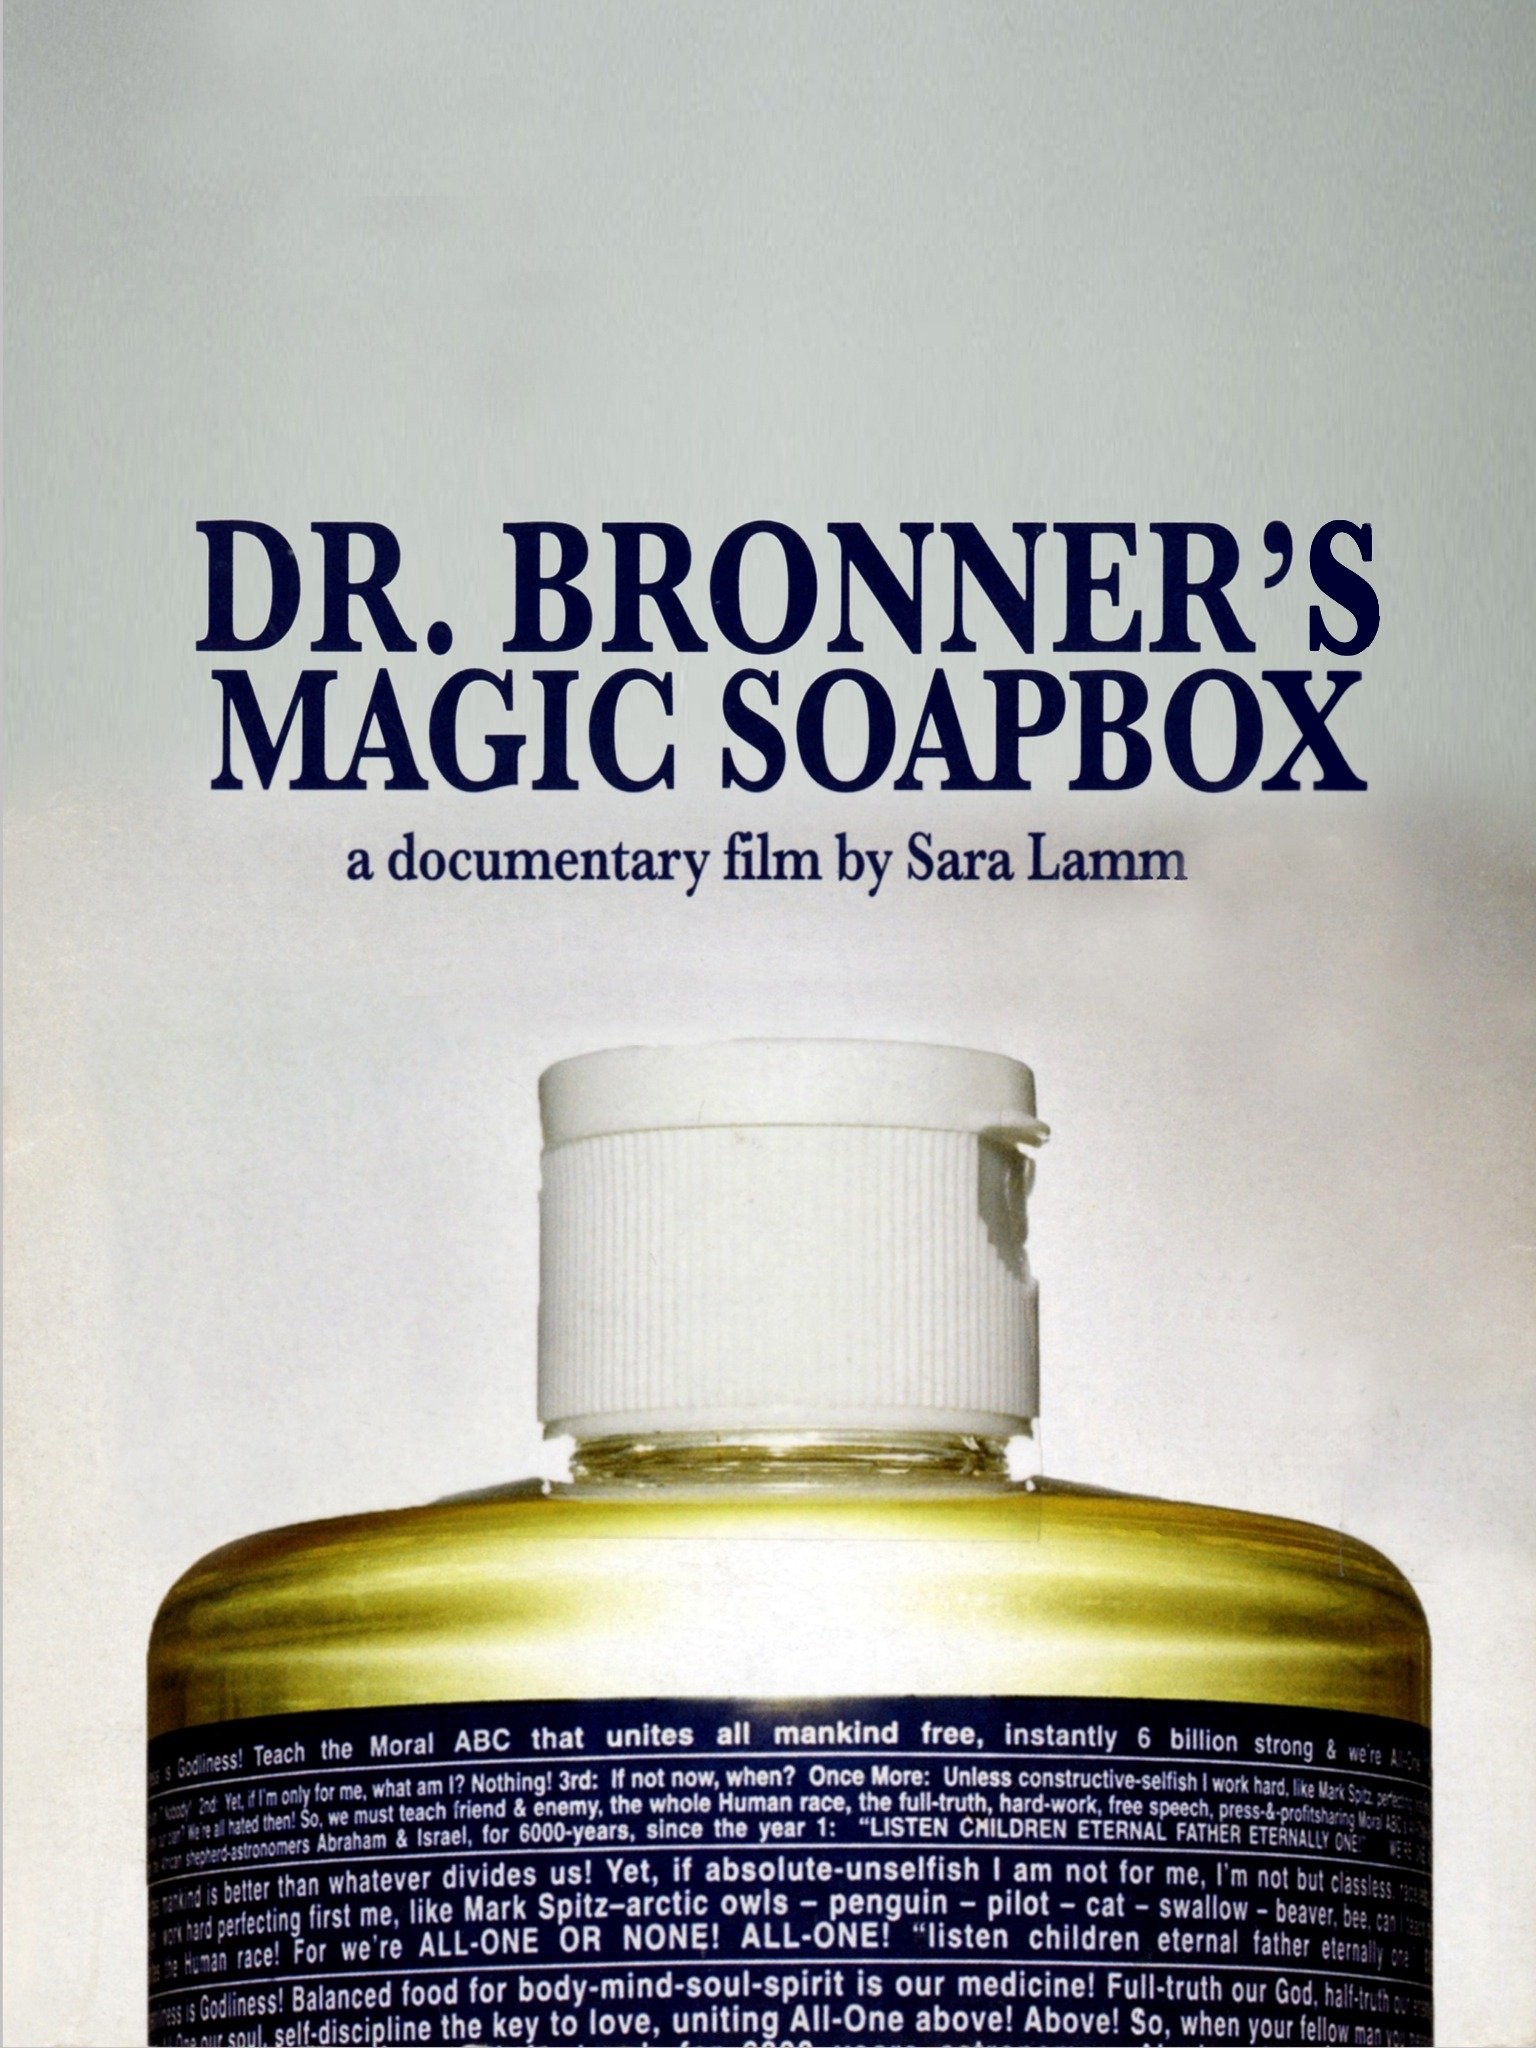 The Peculiar History Behind Dr. Bronner's Magic Soap